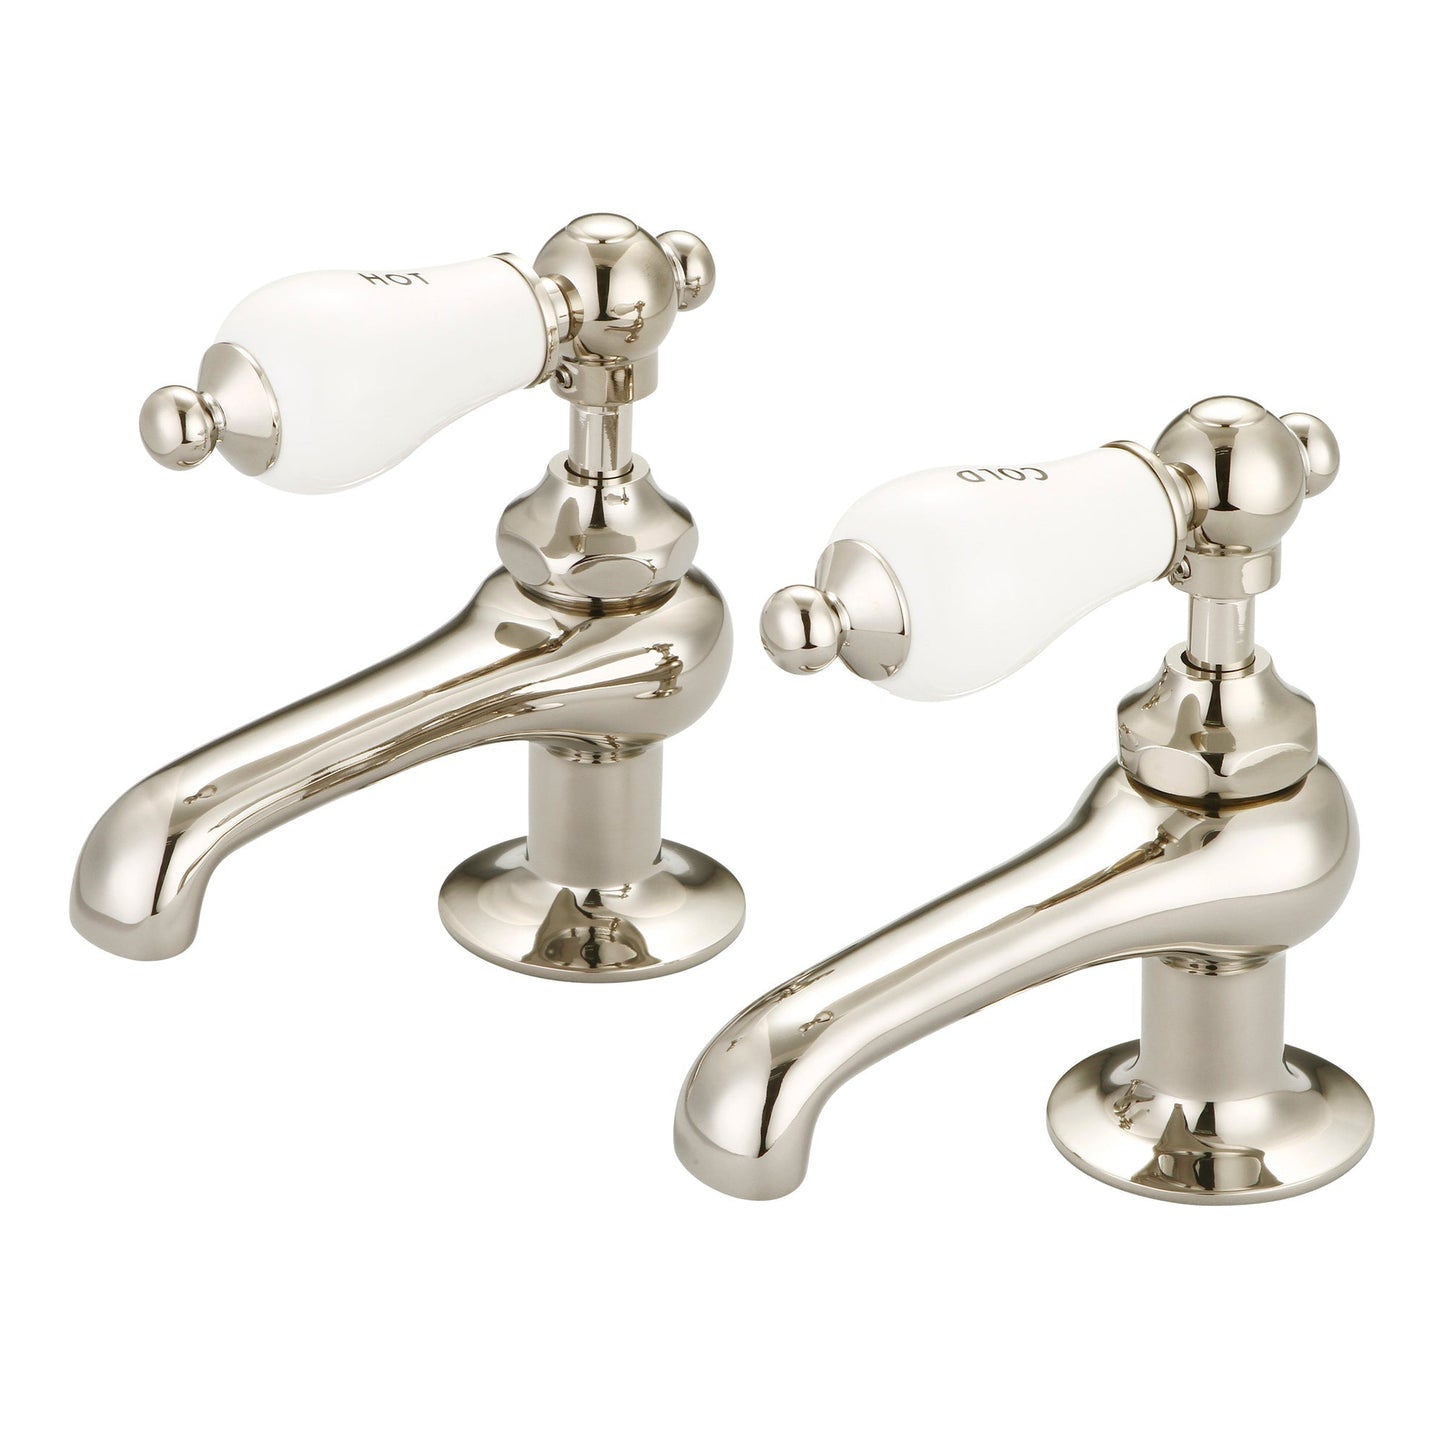 Water Creation Vintage Classic Basin Cocks Lavatory F1-0003 1.88" Ivory Solid Brass Faucet With Porcelain Lever Handles, Hot And Cold Labels Included